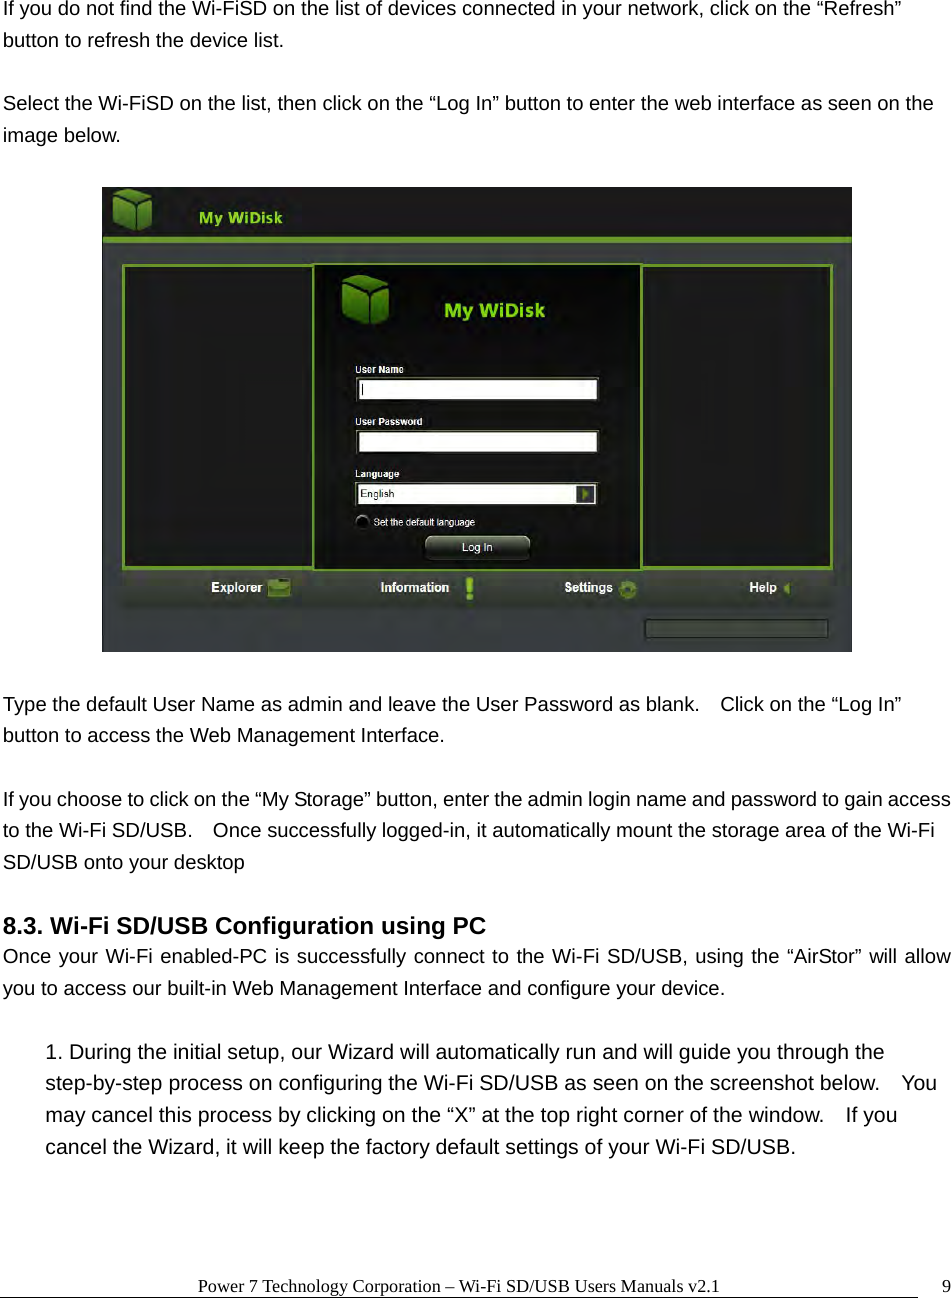 Power 7 Technology Corporation – Wi-Fi SD/USB Users Manuals v2.1  9 If you do not find the Wi-FiSD on the list of devices connected in your network, click on the “Refresh” button to refresh the device list.  Select the Wi-FiSD on the list, then click on the “Log In” button to enter the web interface as seen on the image below.      Type the default User Name as admin and leave the User Password as blank.    Click on the “Log In” button to access the Web Management Interface.  If you choose to click on the “My Storage” button, enter the admin login name and password to gain access to the Wi-Fi SD/USB.    Once successfully logged-in, it automatically mount the storage area of the Wi-Fi SD/USB onto your desktop  8.3. Wi-Fi SD/USB Configuration using PC Once your Wi-Fi enabled-PC is successfully connect to the Wi-Fi SD/USB, using the “AirStor” will allow you to access our built-in Web Management Interface and configure your device.    1. During the initial setup, our Wizard will automatically run and will guide you through the step-by-step process on configuring the Wi-Fi SD/USB as seen on the screenshot below.    You may cancel this process by clicking on the “X” at the top right corner of the window.    If you cancel the Wizard, it will keep the factory default settings of your Wi-Fi SD/USB.    